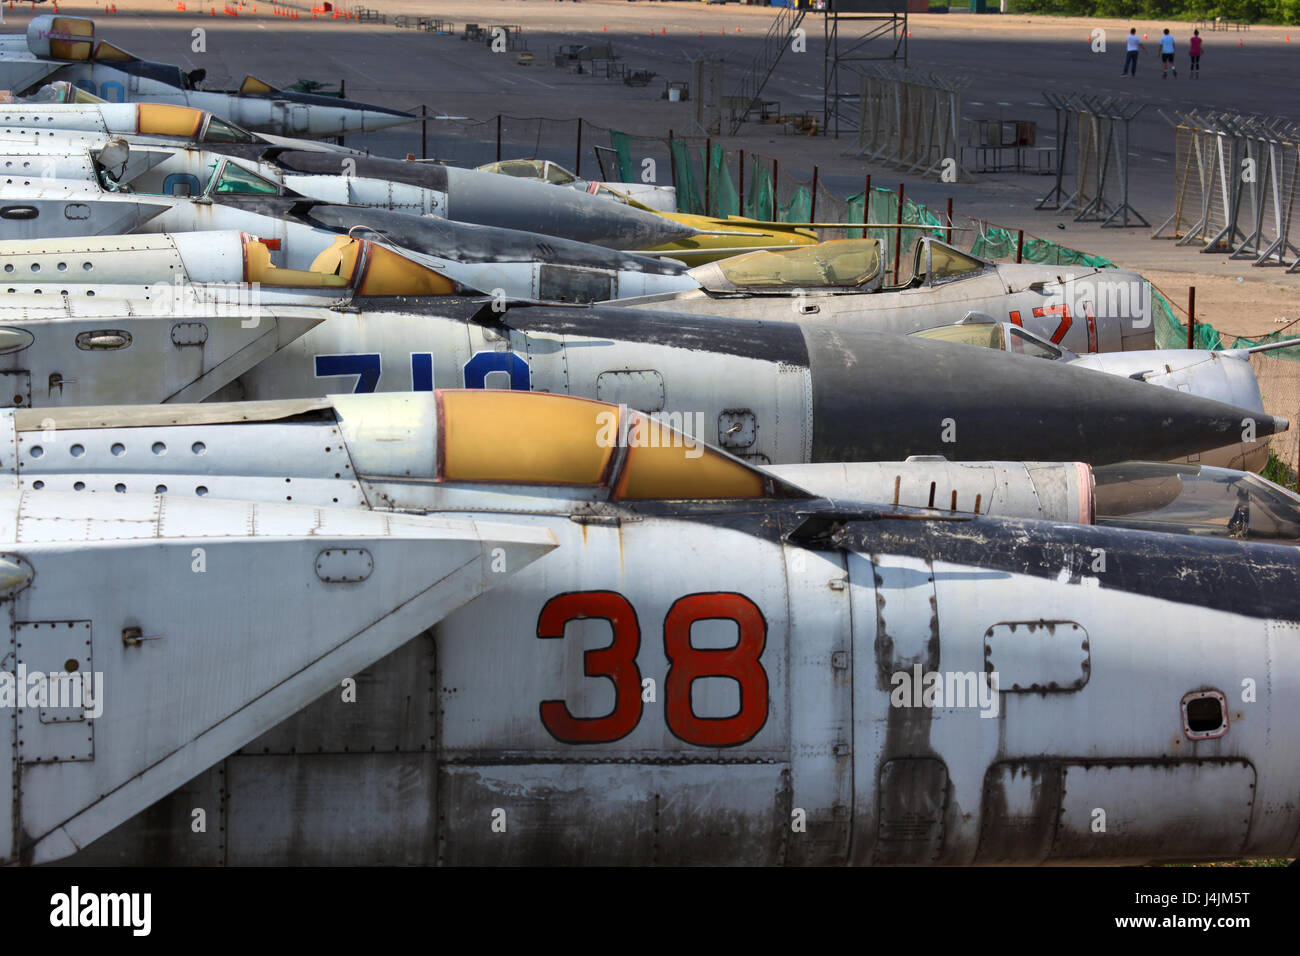 KHODYNSKOE POLE, MOSCOW, RUSSIA - JUNE 24, 2011: Various old airplanes standing at closed airport. Stock Photo